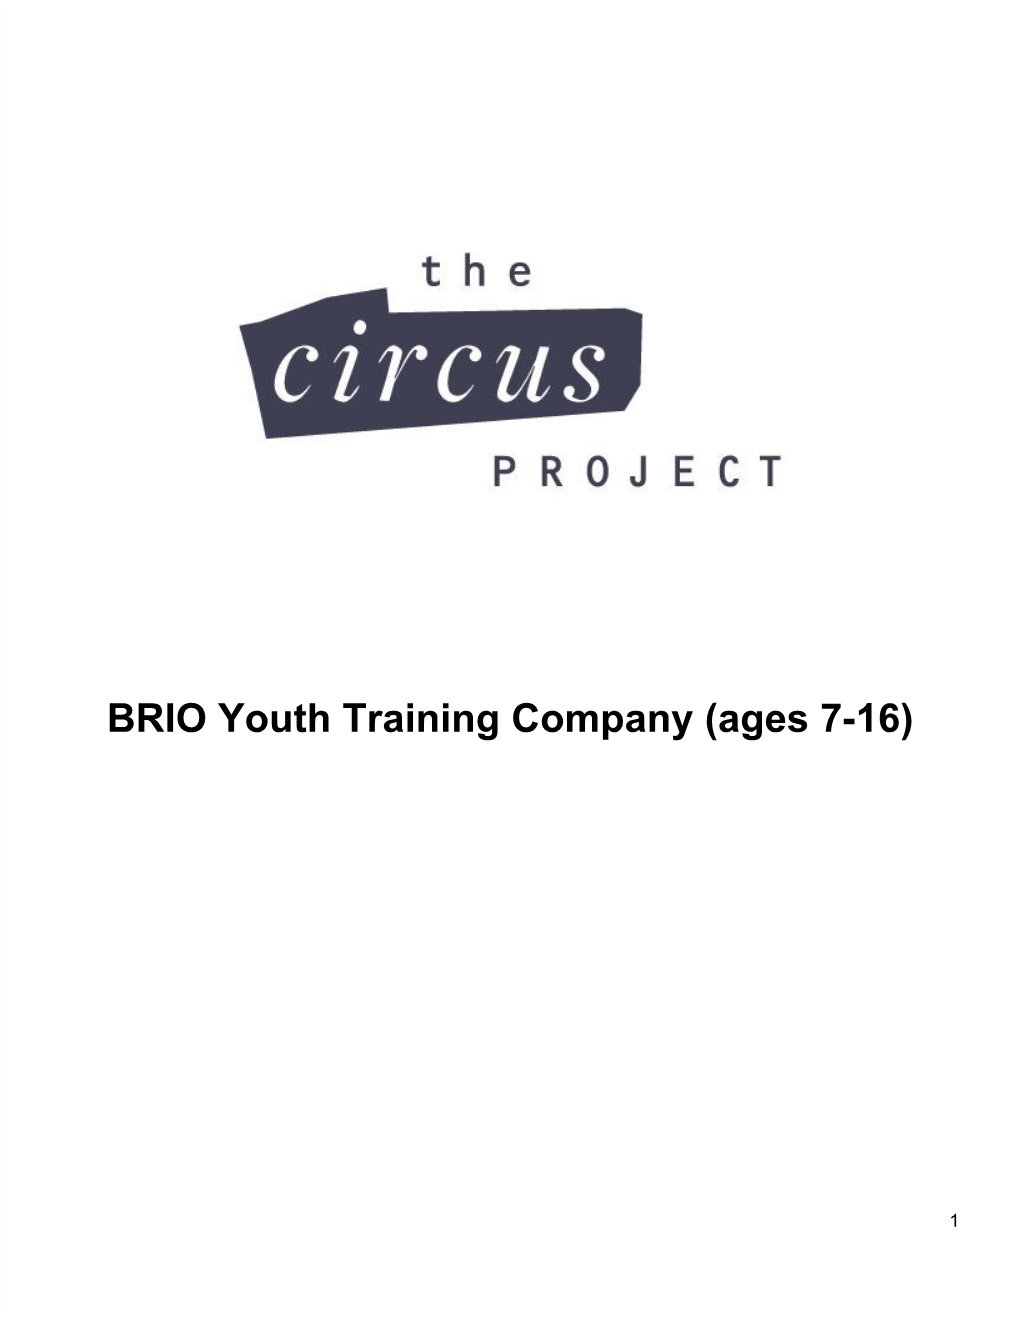 BRIO Youth Training Company (Ages 7-16)